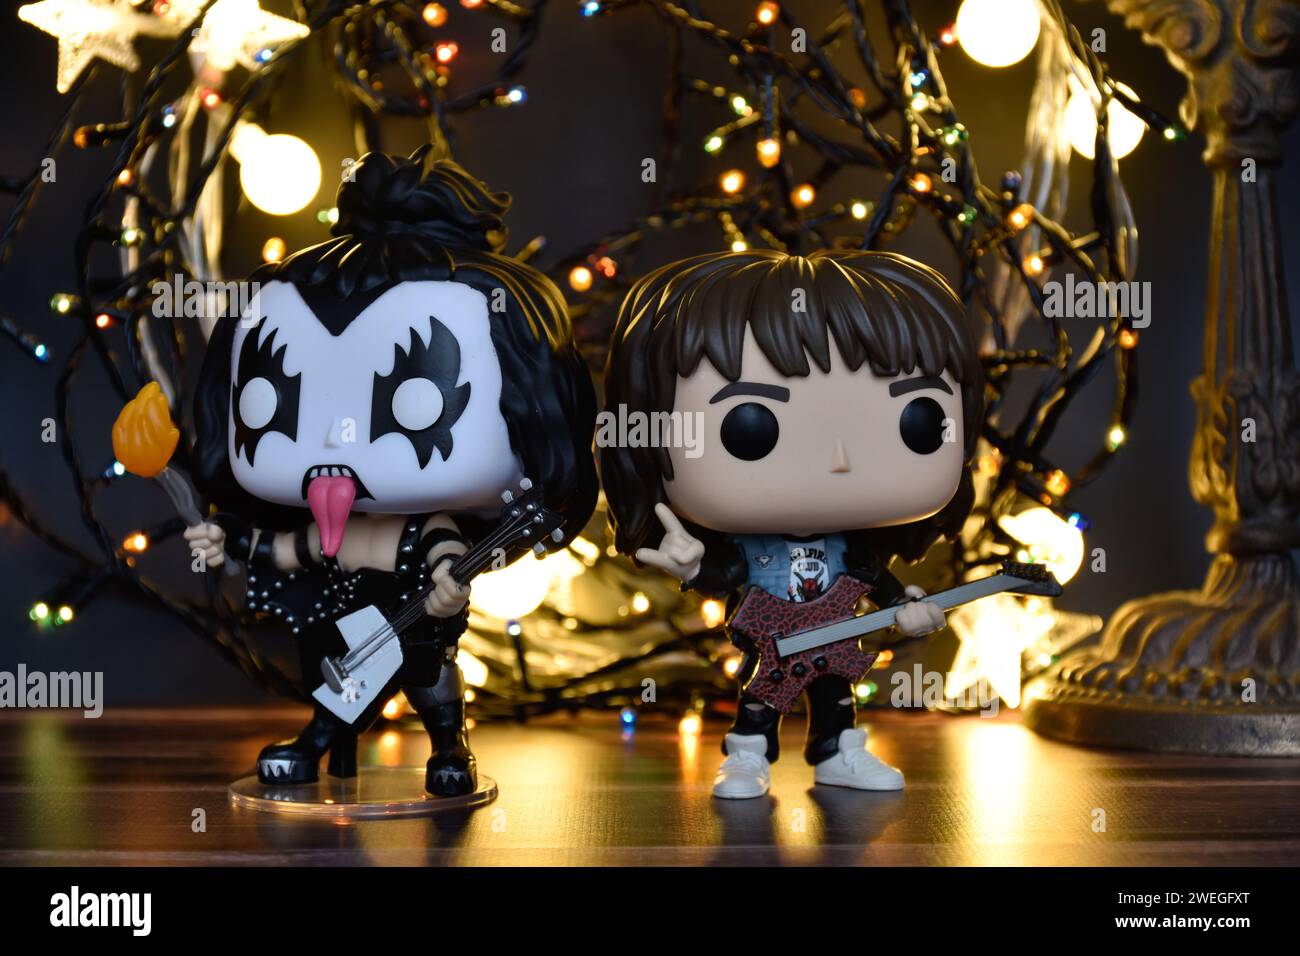 Funko Pop action figures of Gene Simmons The Demon, rock band Kiss and Eddie from TV series Stranger Things. Warm lighting, black background. Stock Photo